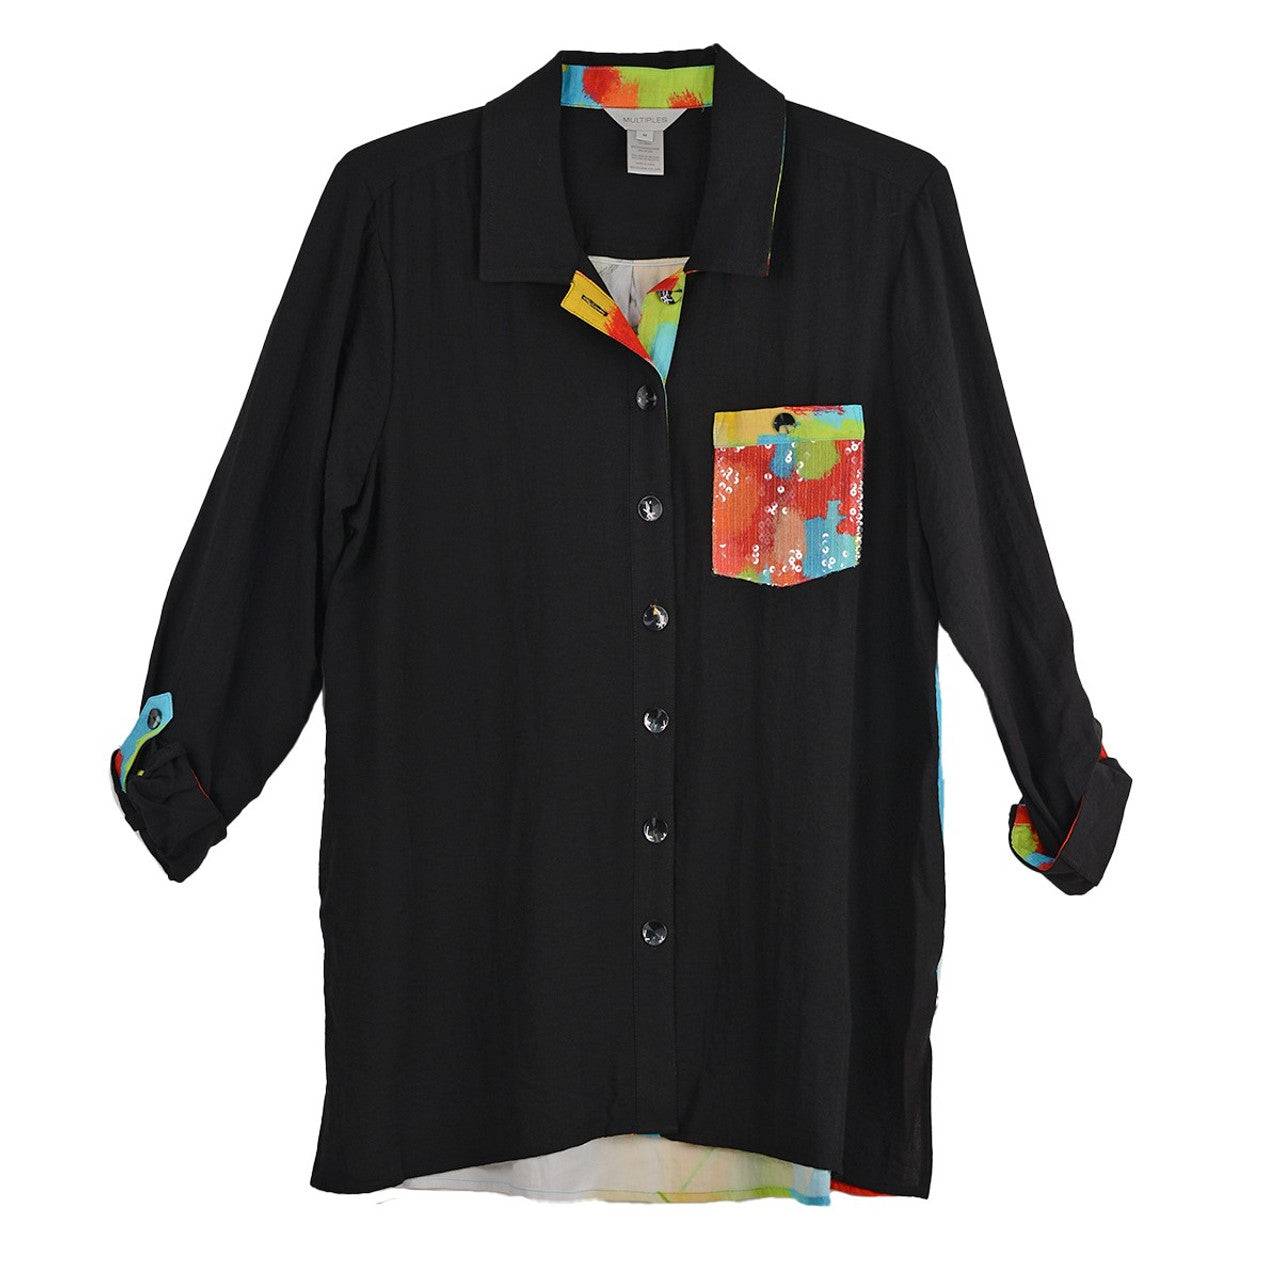 Crinkle Woven Print Shirt w/ Sequin Pocket by Multiples